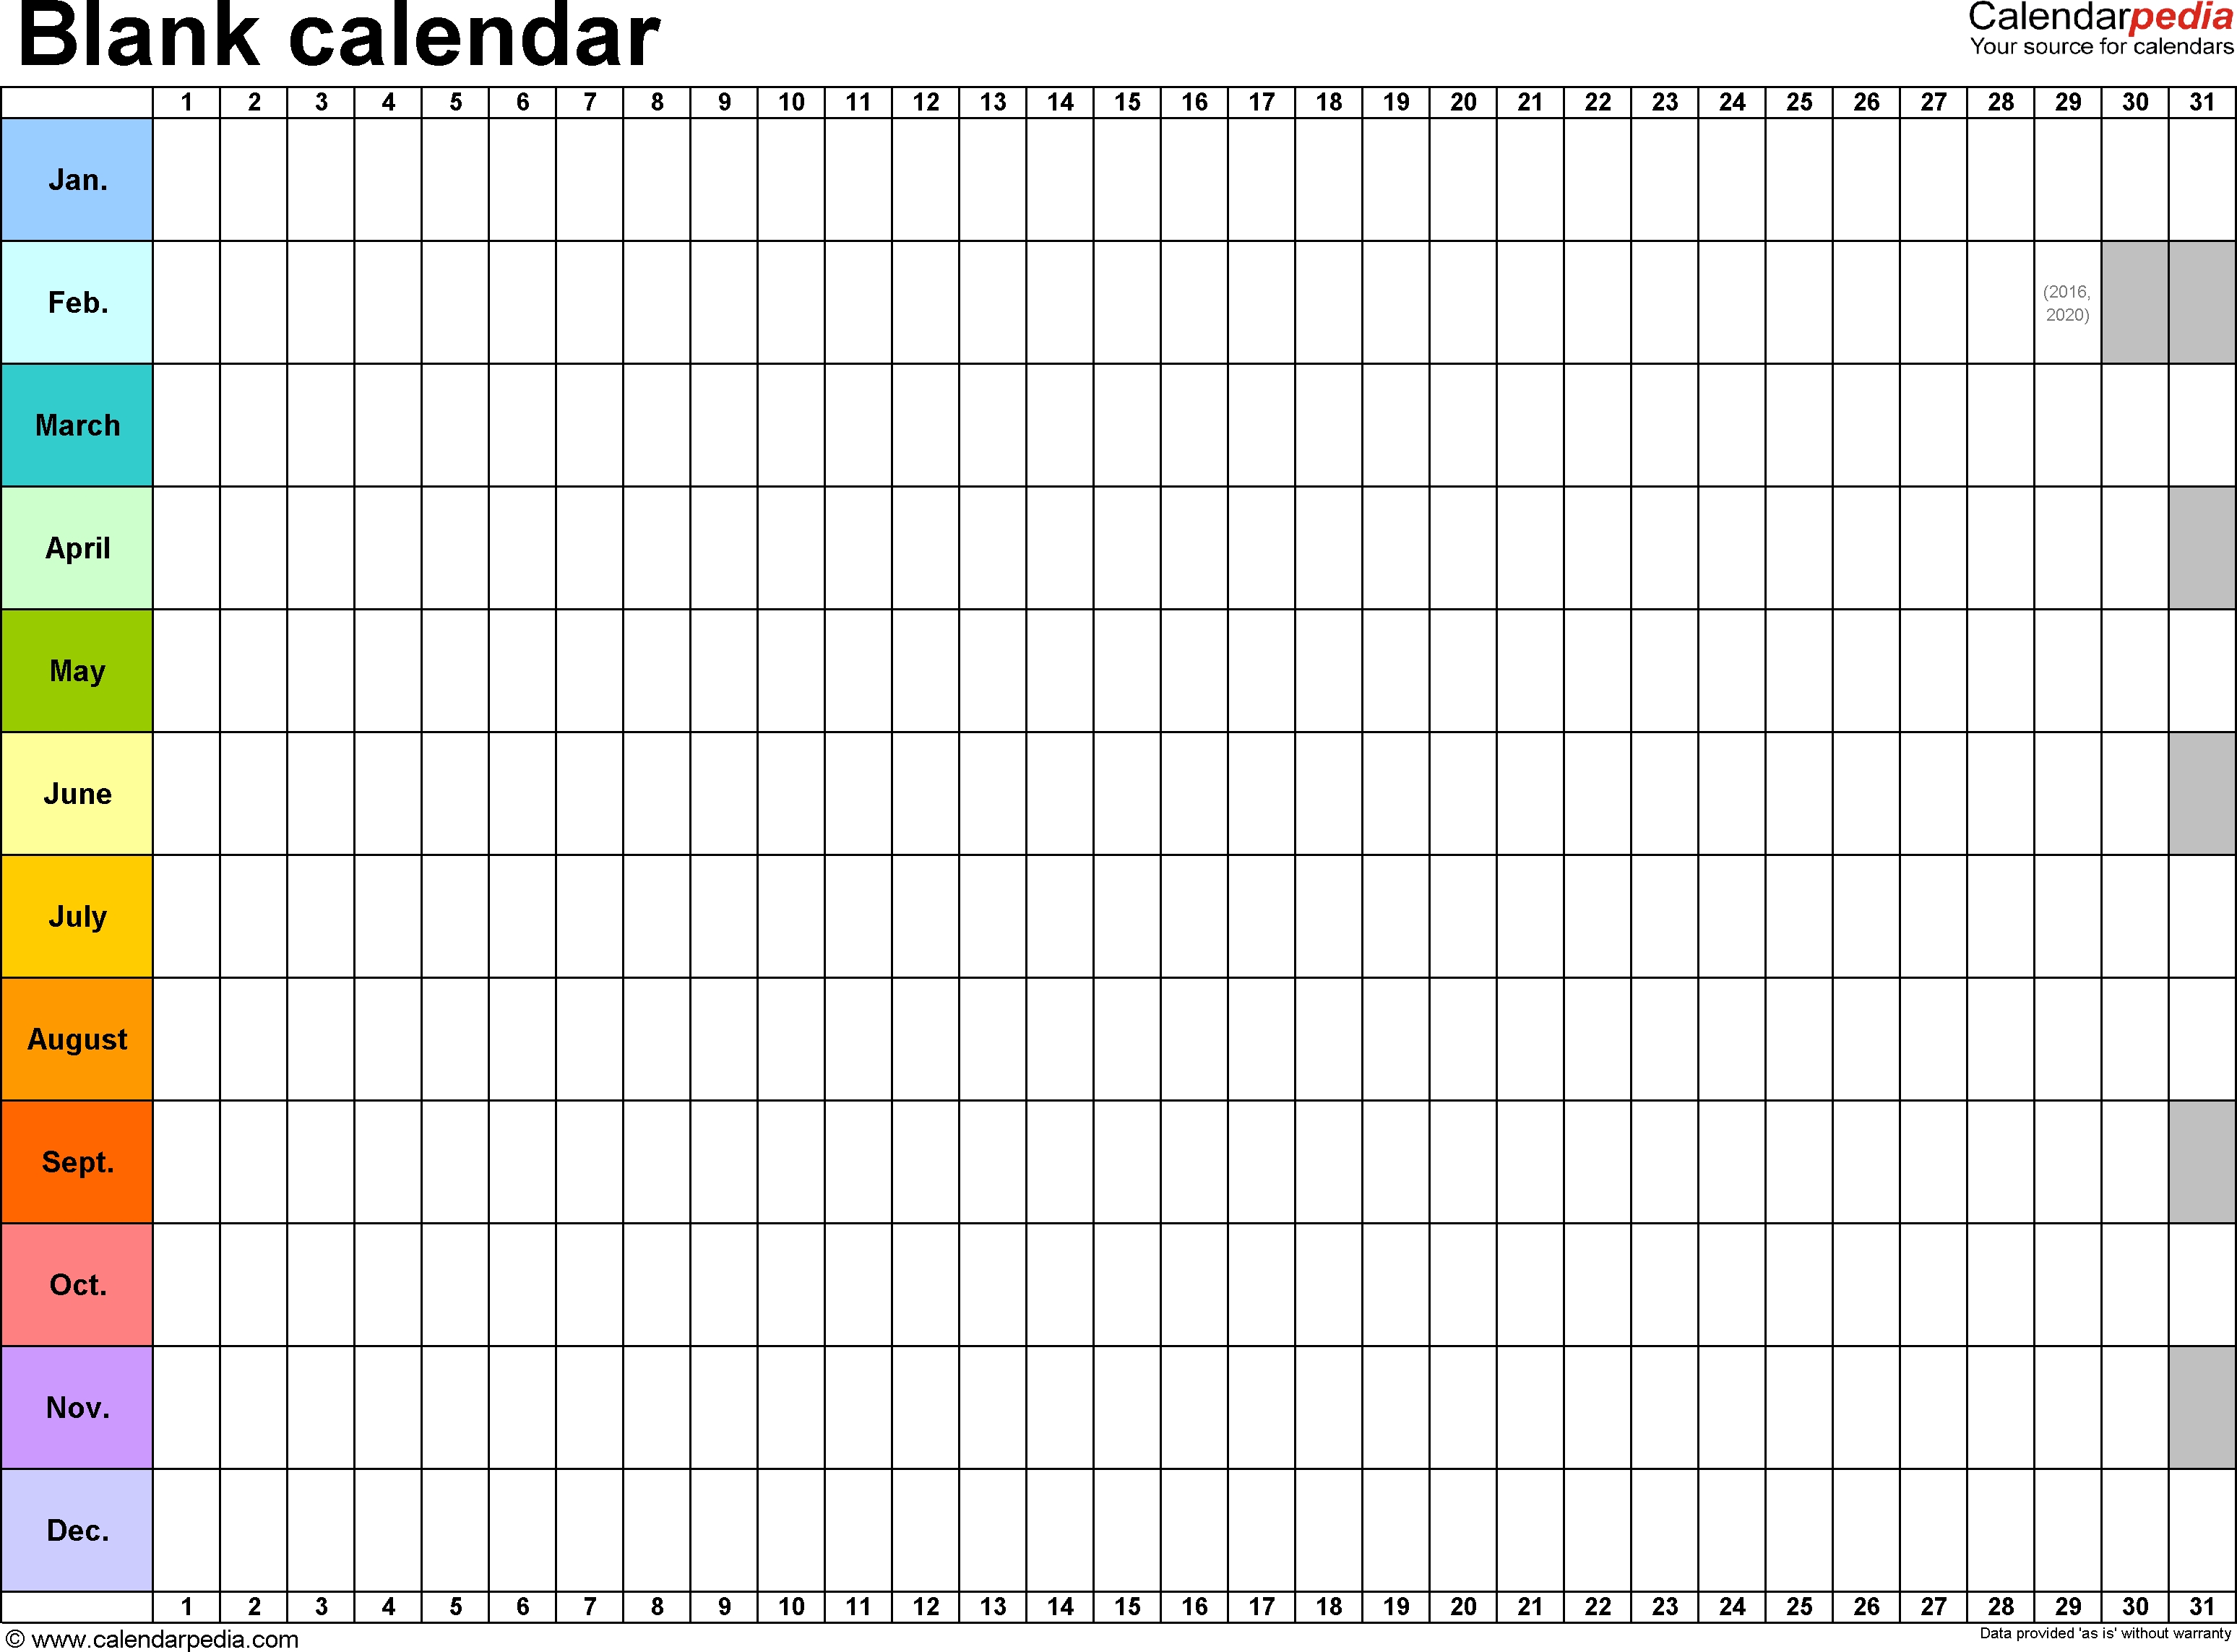 Monthly Schedule Template Blank Calendar Free Printable Icrosoft with regard to Printable Monthly Calendar Planner Template